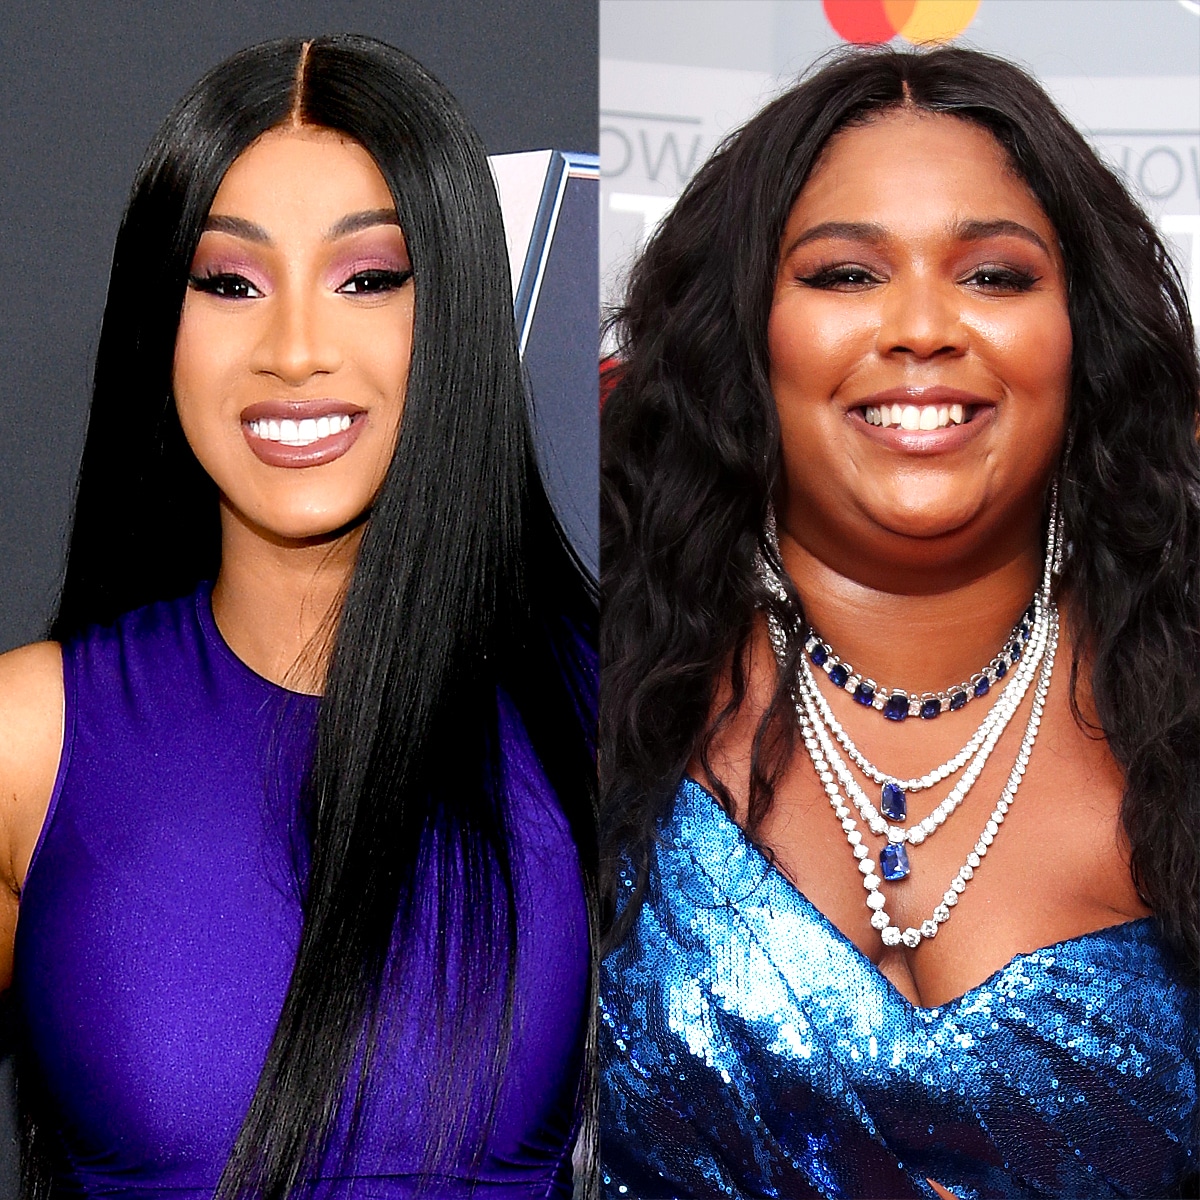 Cardi B Defends Lizzo After She Breaks Down Over Hateful Comments